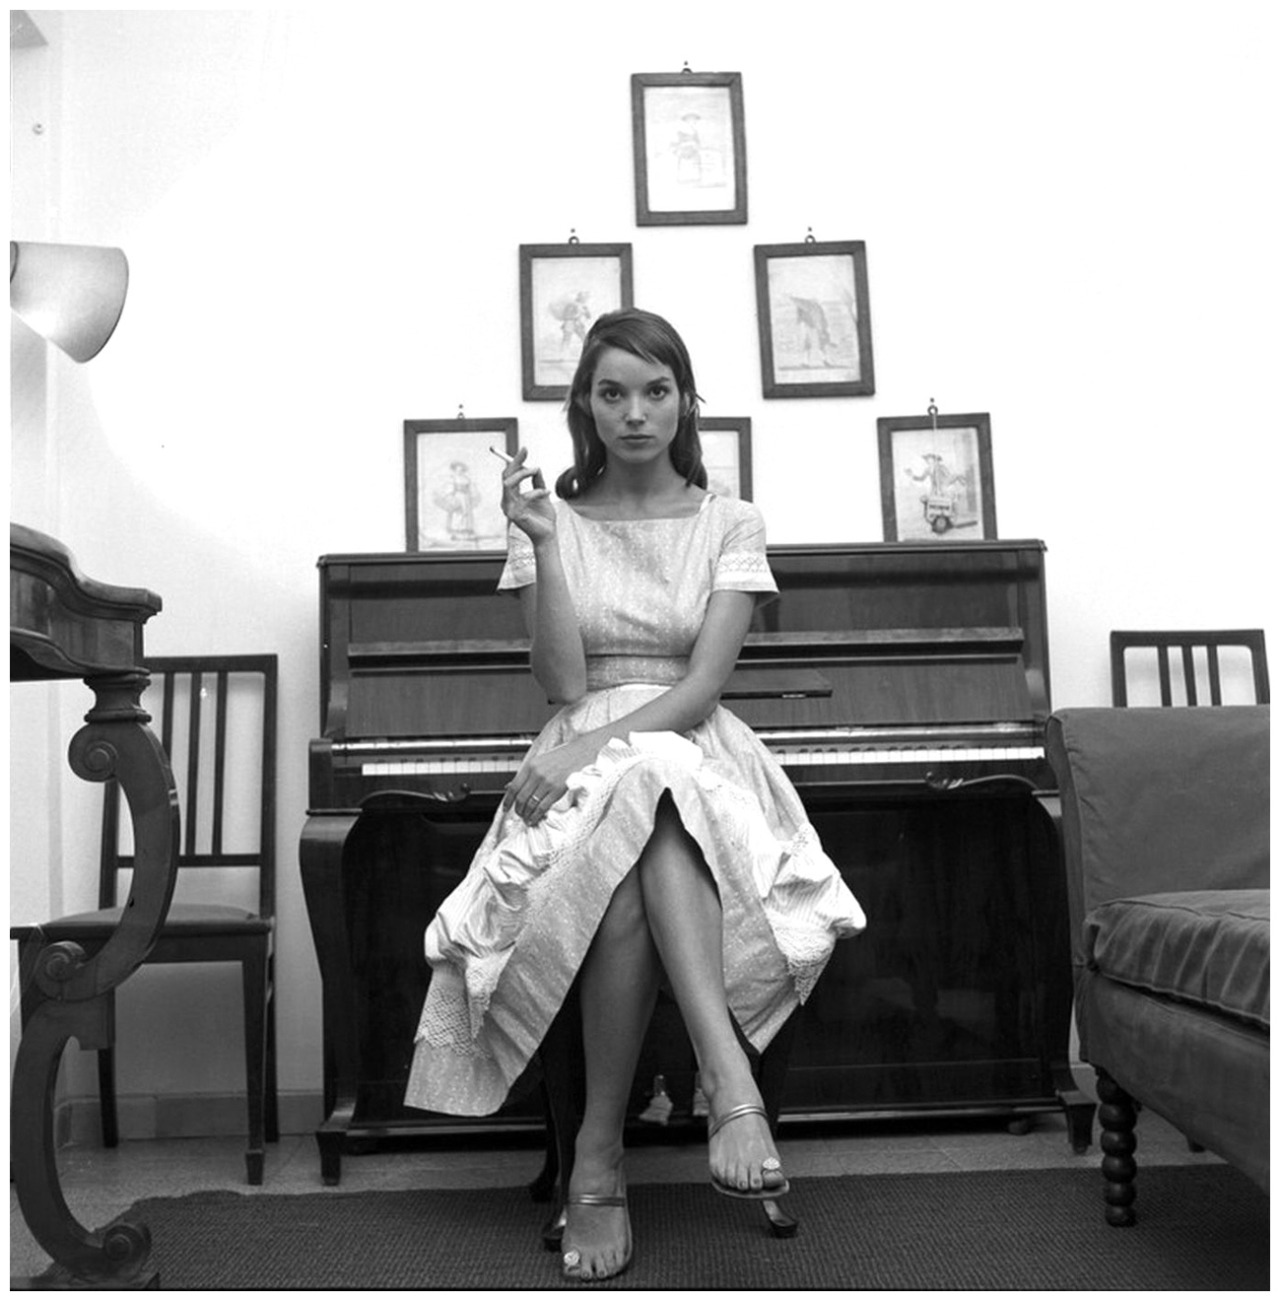 books0977:
“ Elsa Martinelli, at home, seated at her piano, 1957. Photo by Angelo Frontoni.
Born Elisa Tia, Martinelli in 1953 was discovered by Roberto Capucci who introduced her to the world of fashion. She became a model and began playing small...